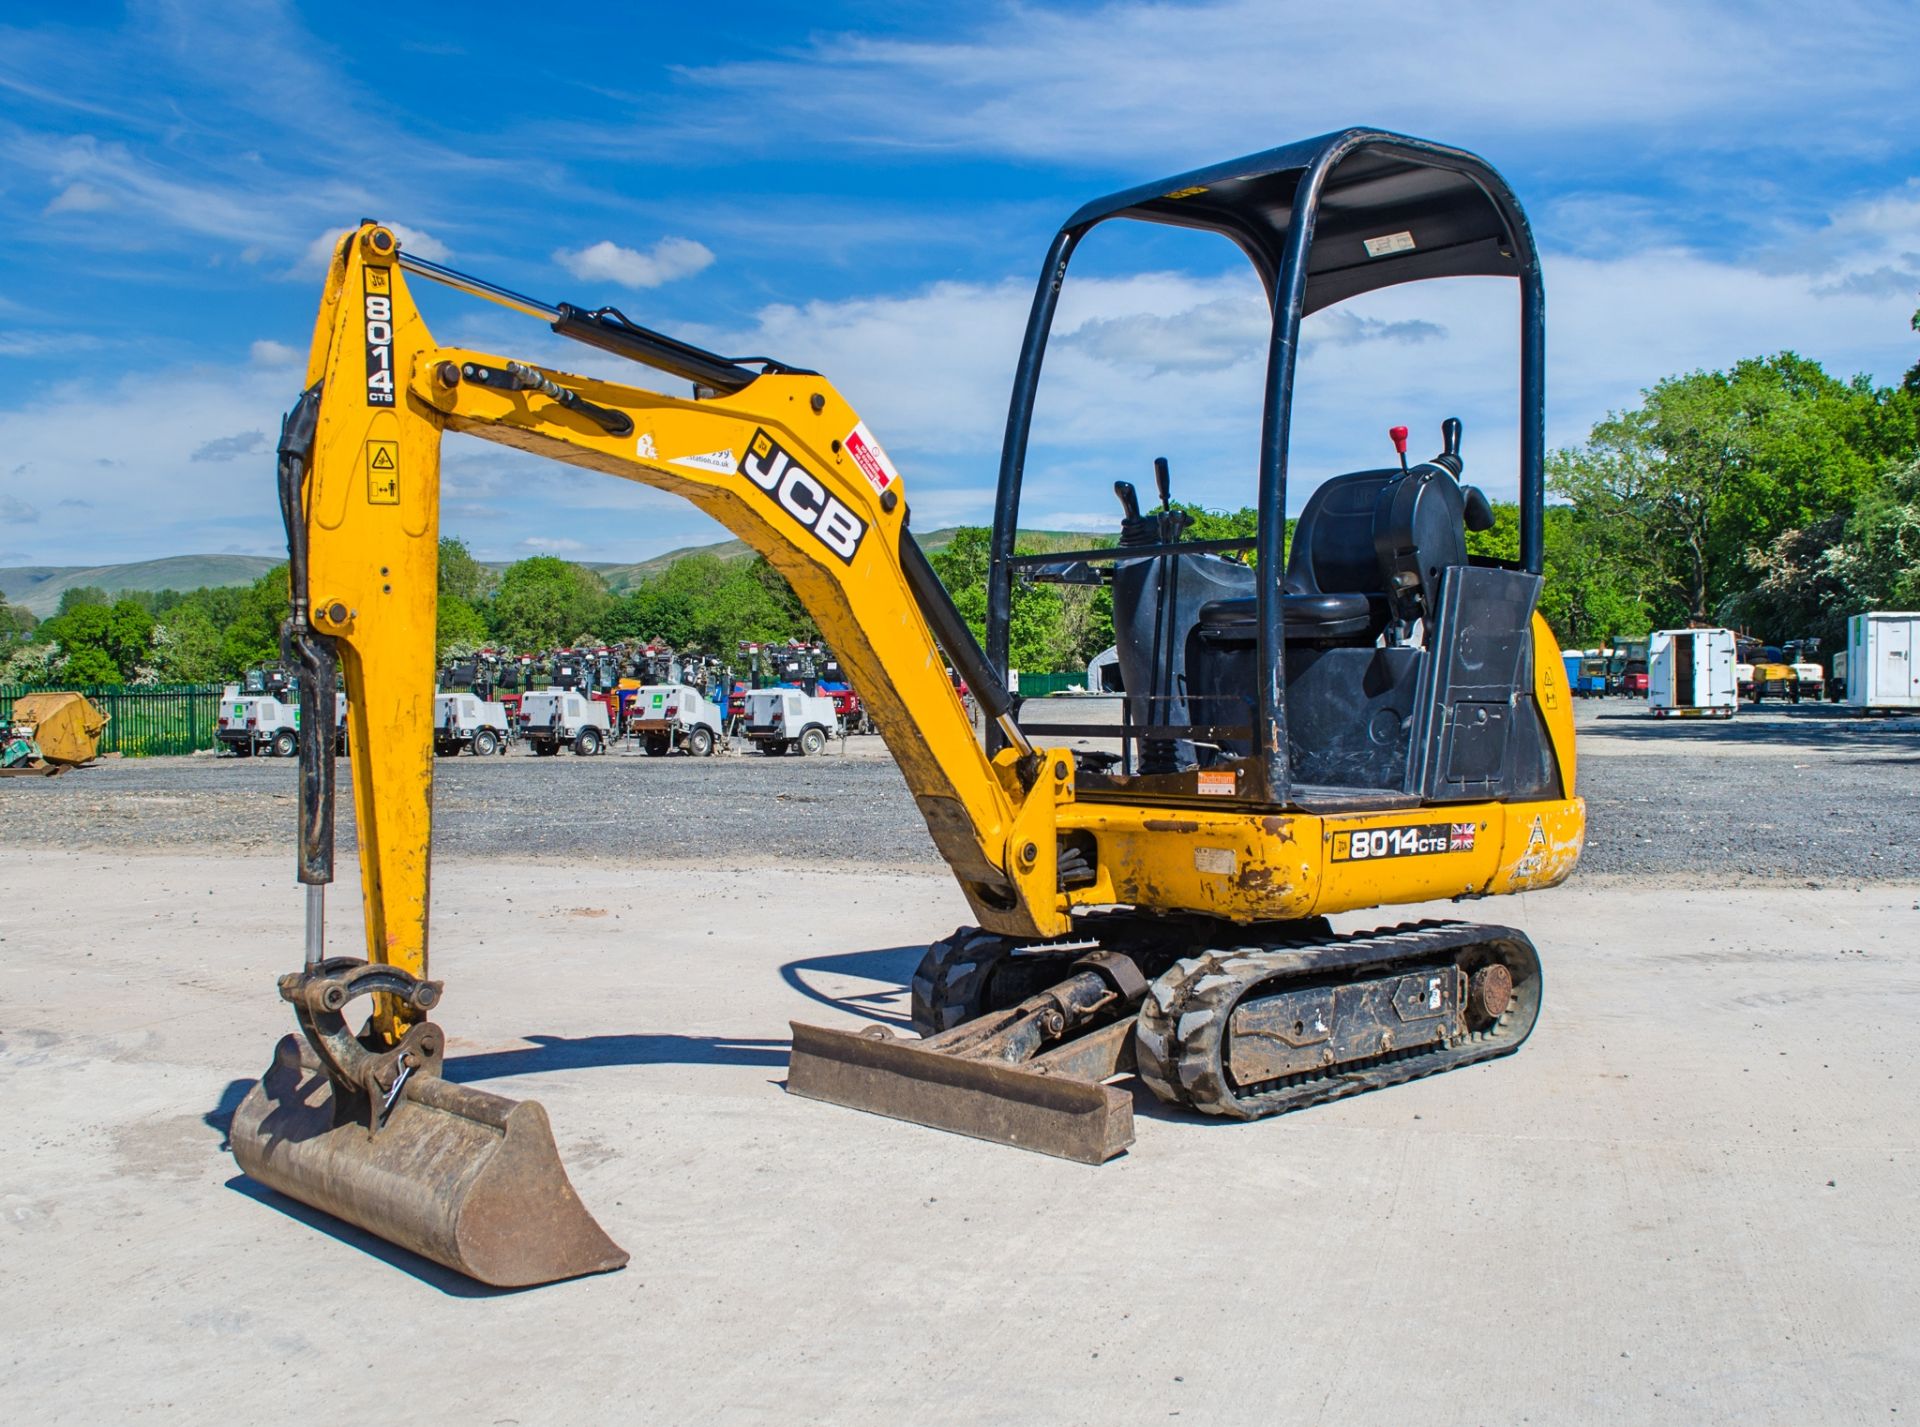 JCB 8014 CTS 1.5 tonne rubber tracked mini excavator Year: 2014 S/N: 2070389 Recorded Hours: 1616